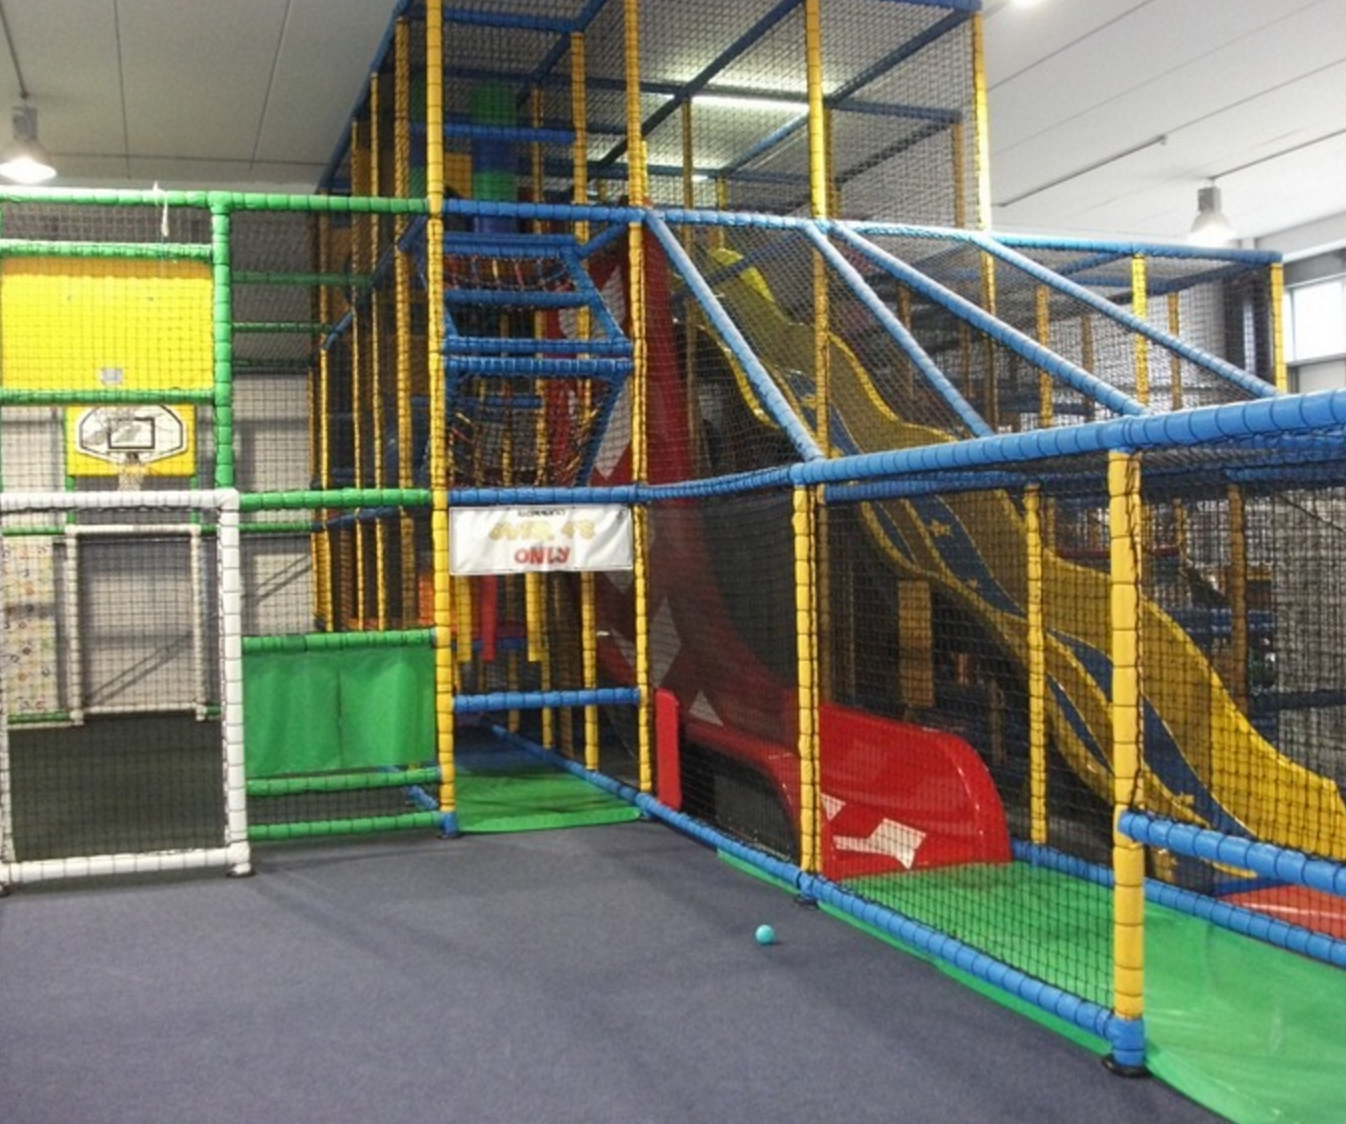 Fun Shack Play Centre - YourDaysOut